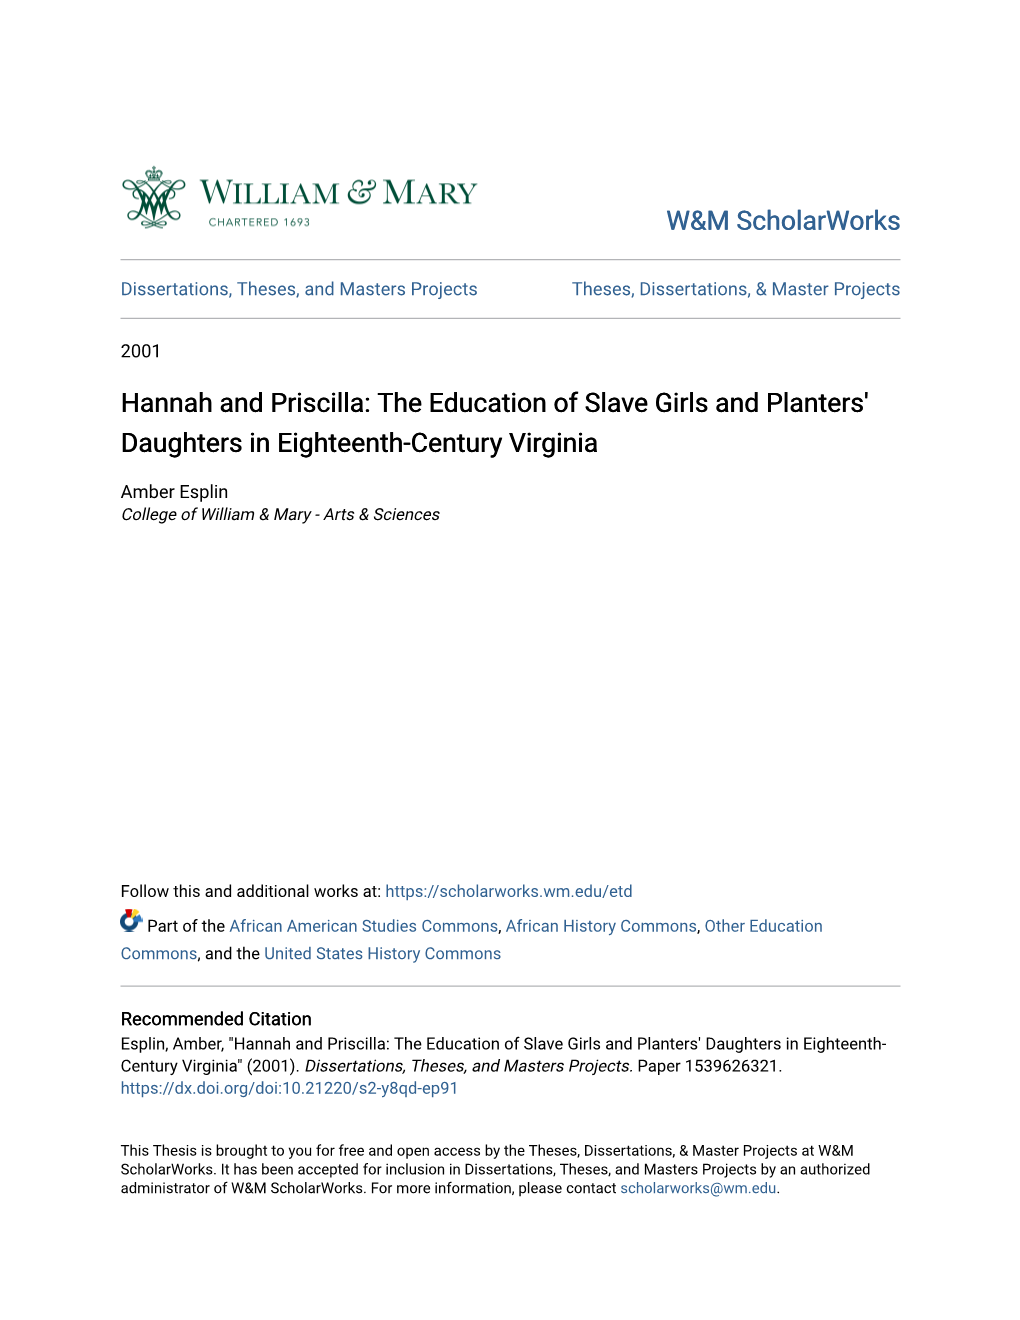 Hannah and Priscilla: the Education of Slave Girls and Planters' Daughters in Eighteenth-Century Virginia